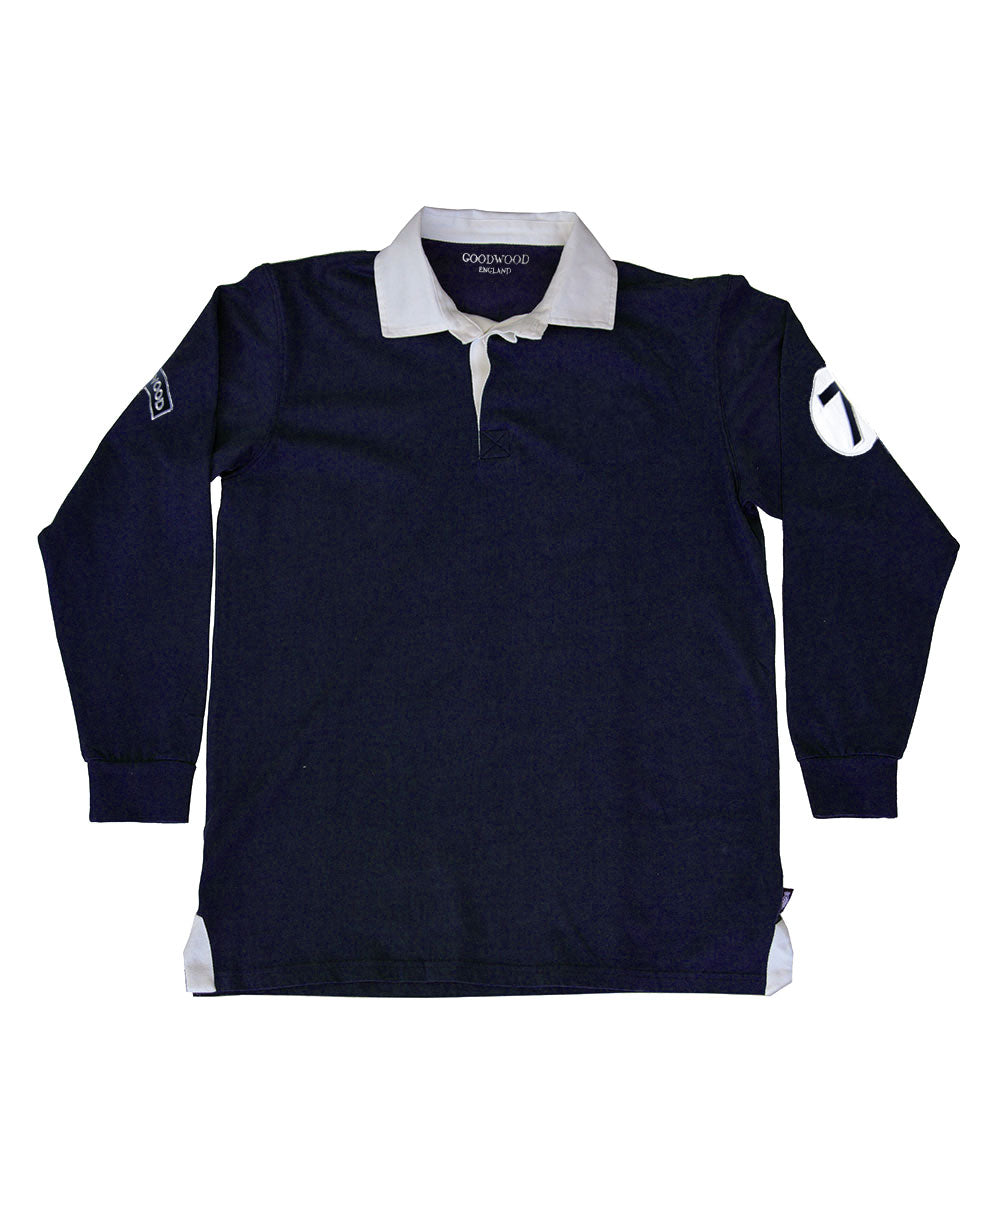 Stirling Moss Lucky 7 Navy Cotton Mens Rugby Shirt